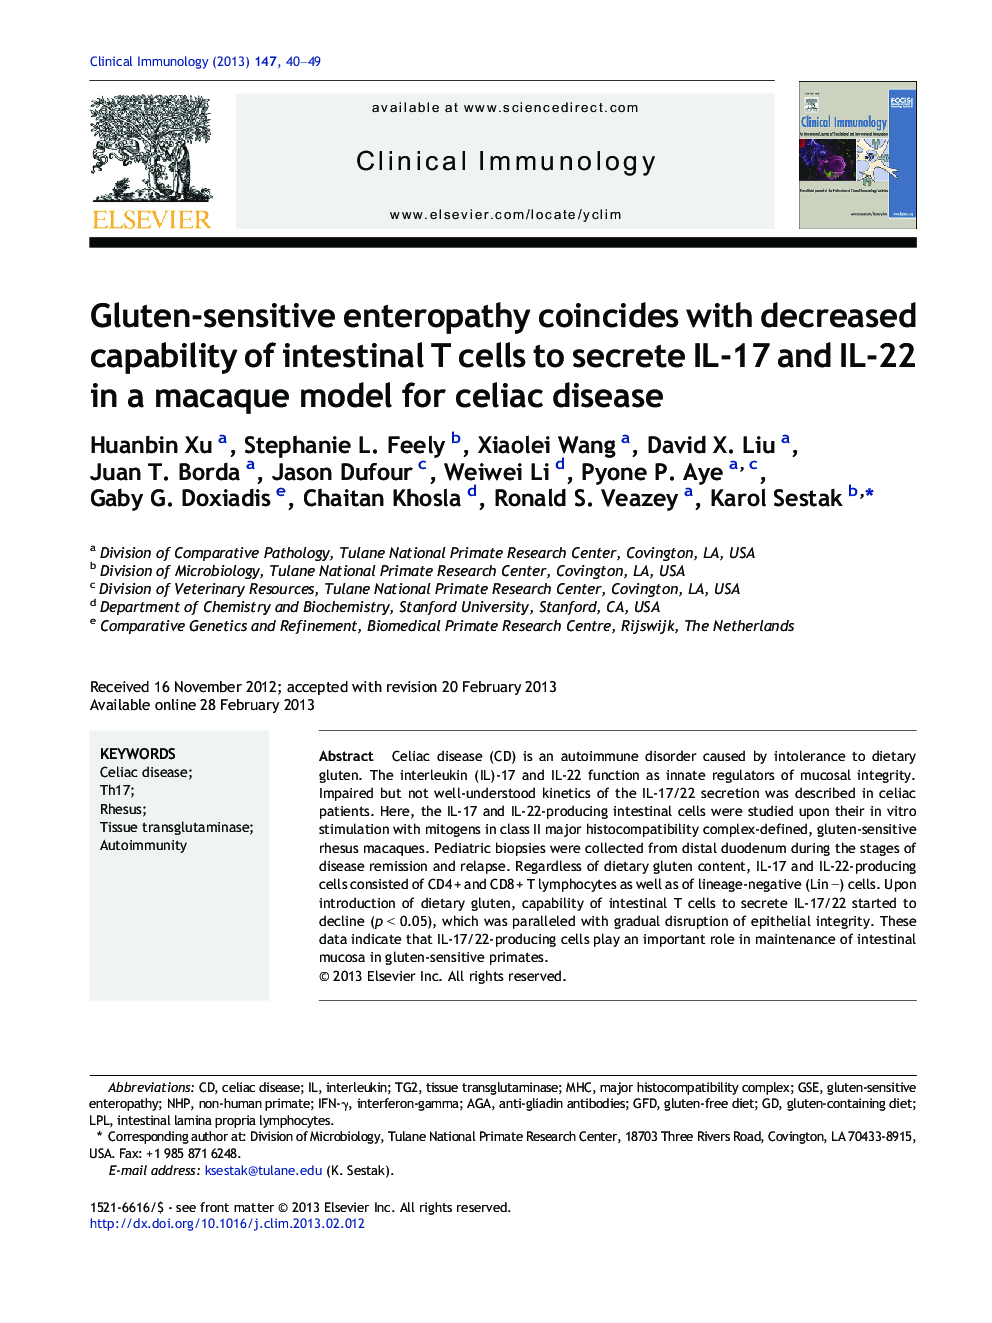 Gluten-sensitive enteropathy coincides with decreased capability of intestinal T cells to secrete IL-17 and IL-22 in a macaque model for celiac disease